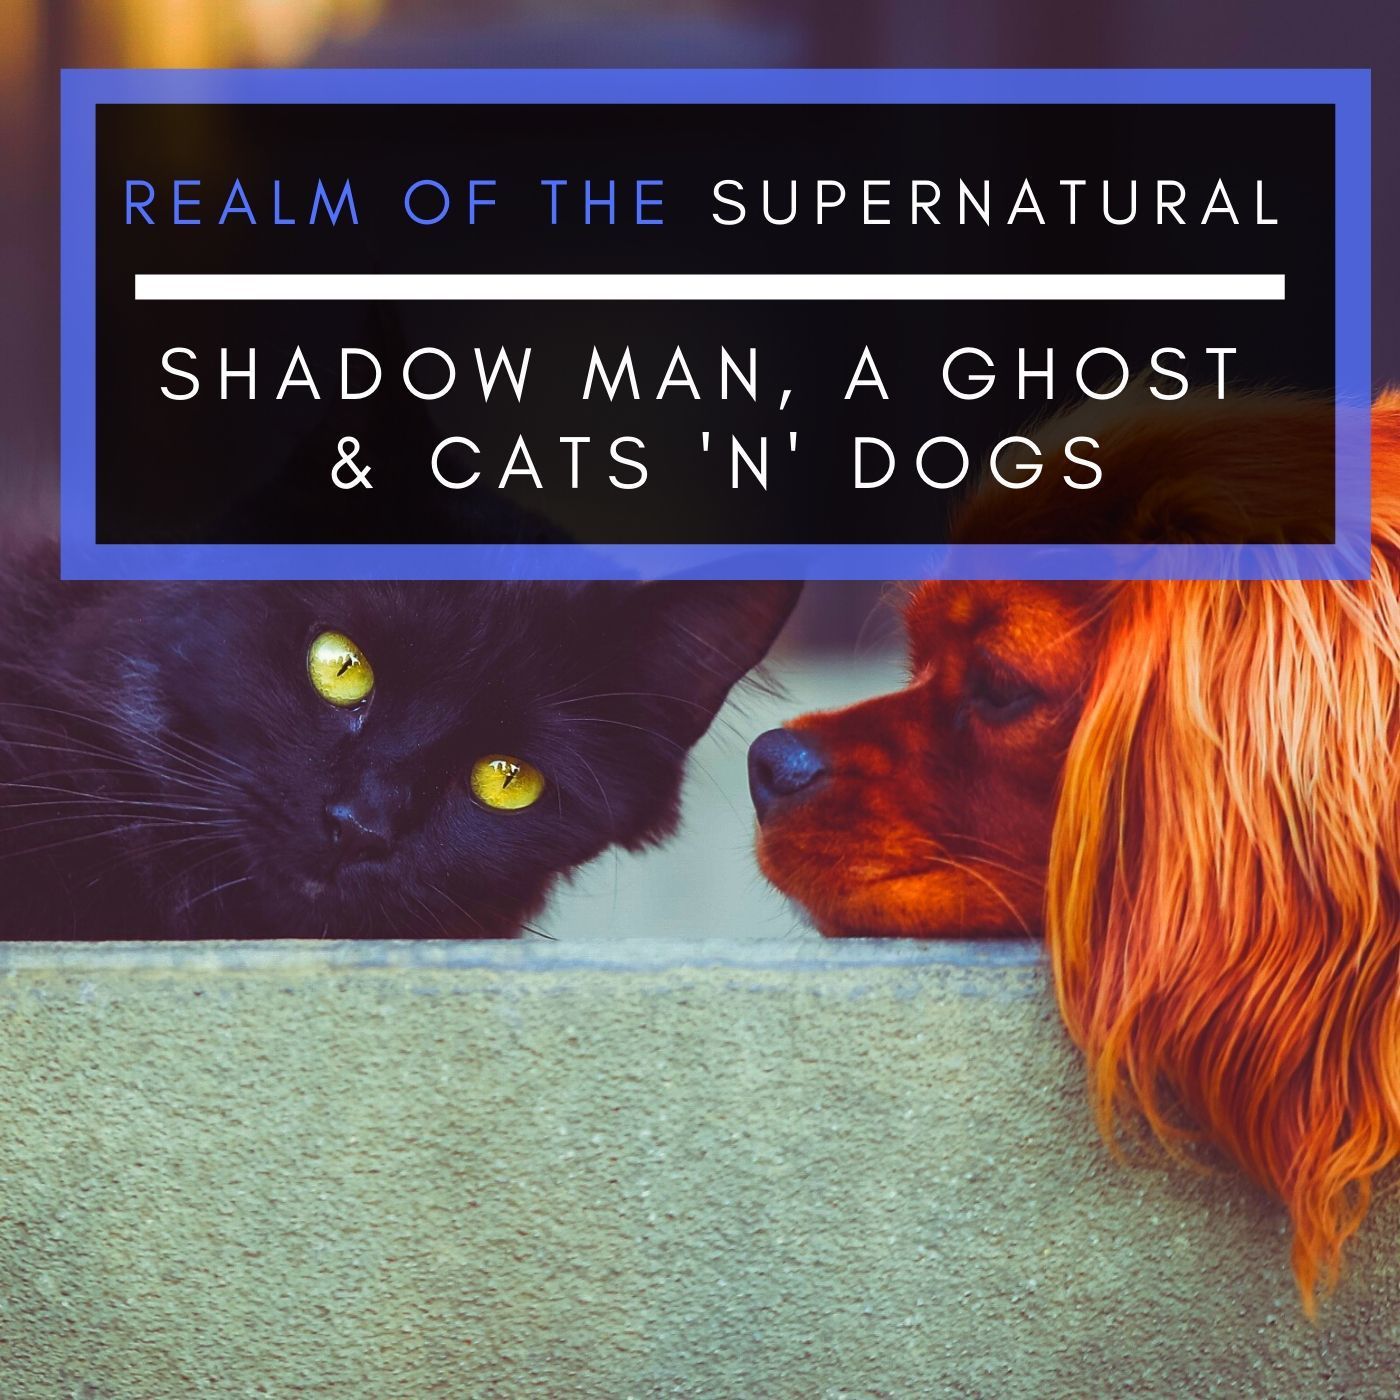 Ep 168 Shadow man, A Ghost & Cats ’n’ Dogs